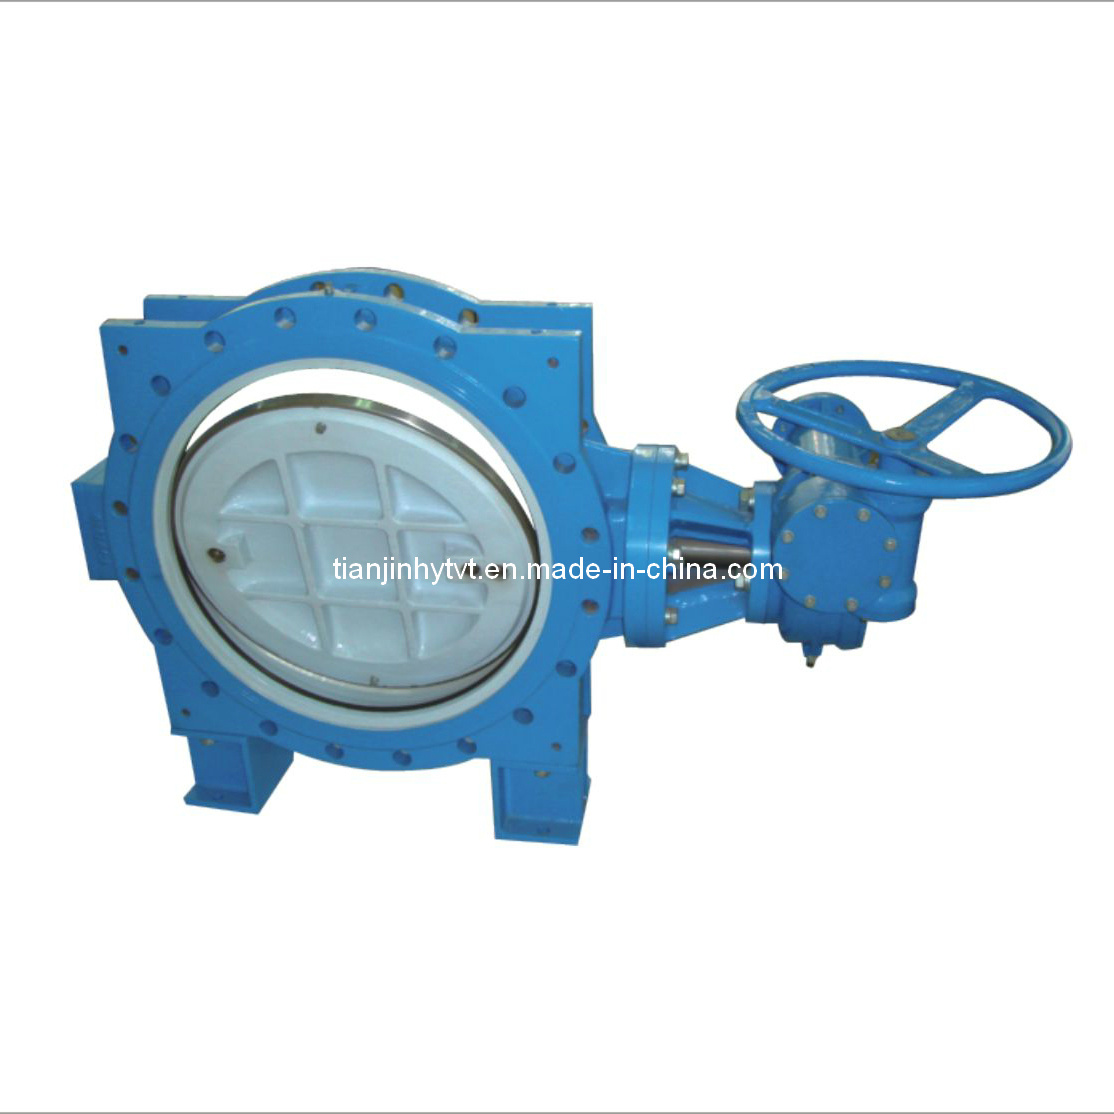 Double Eccentric Resilient Seated Butterfly Valve with Worm Gear (D343X-10/16)